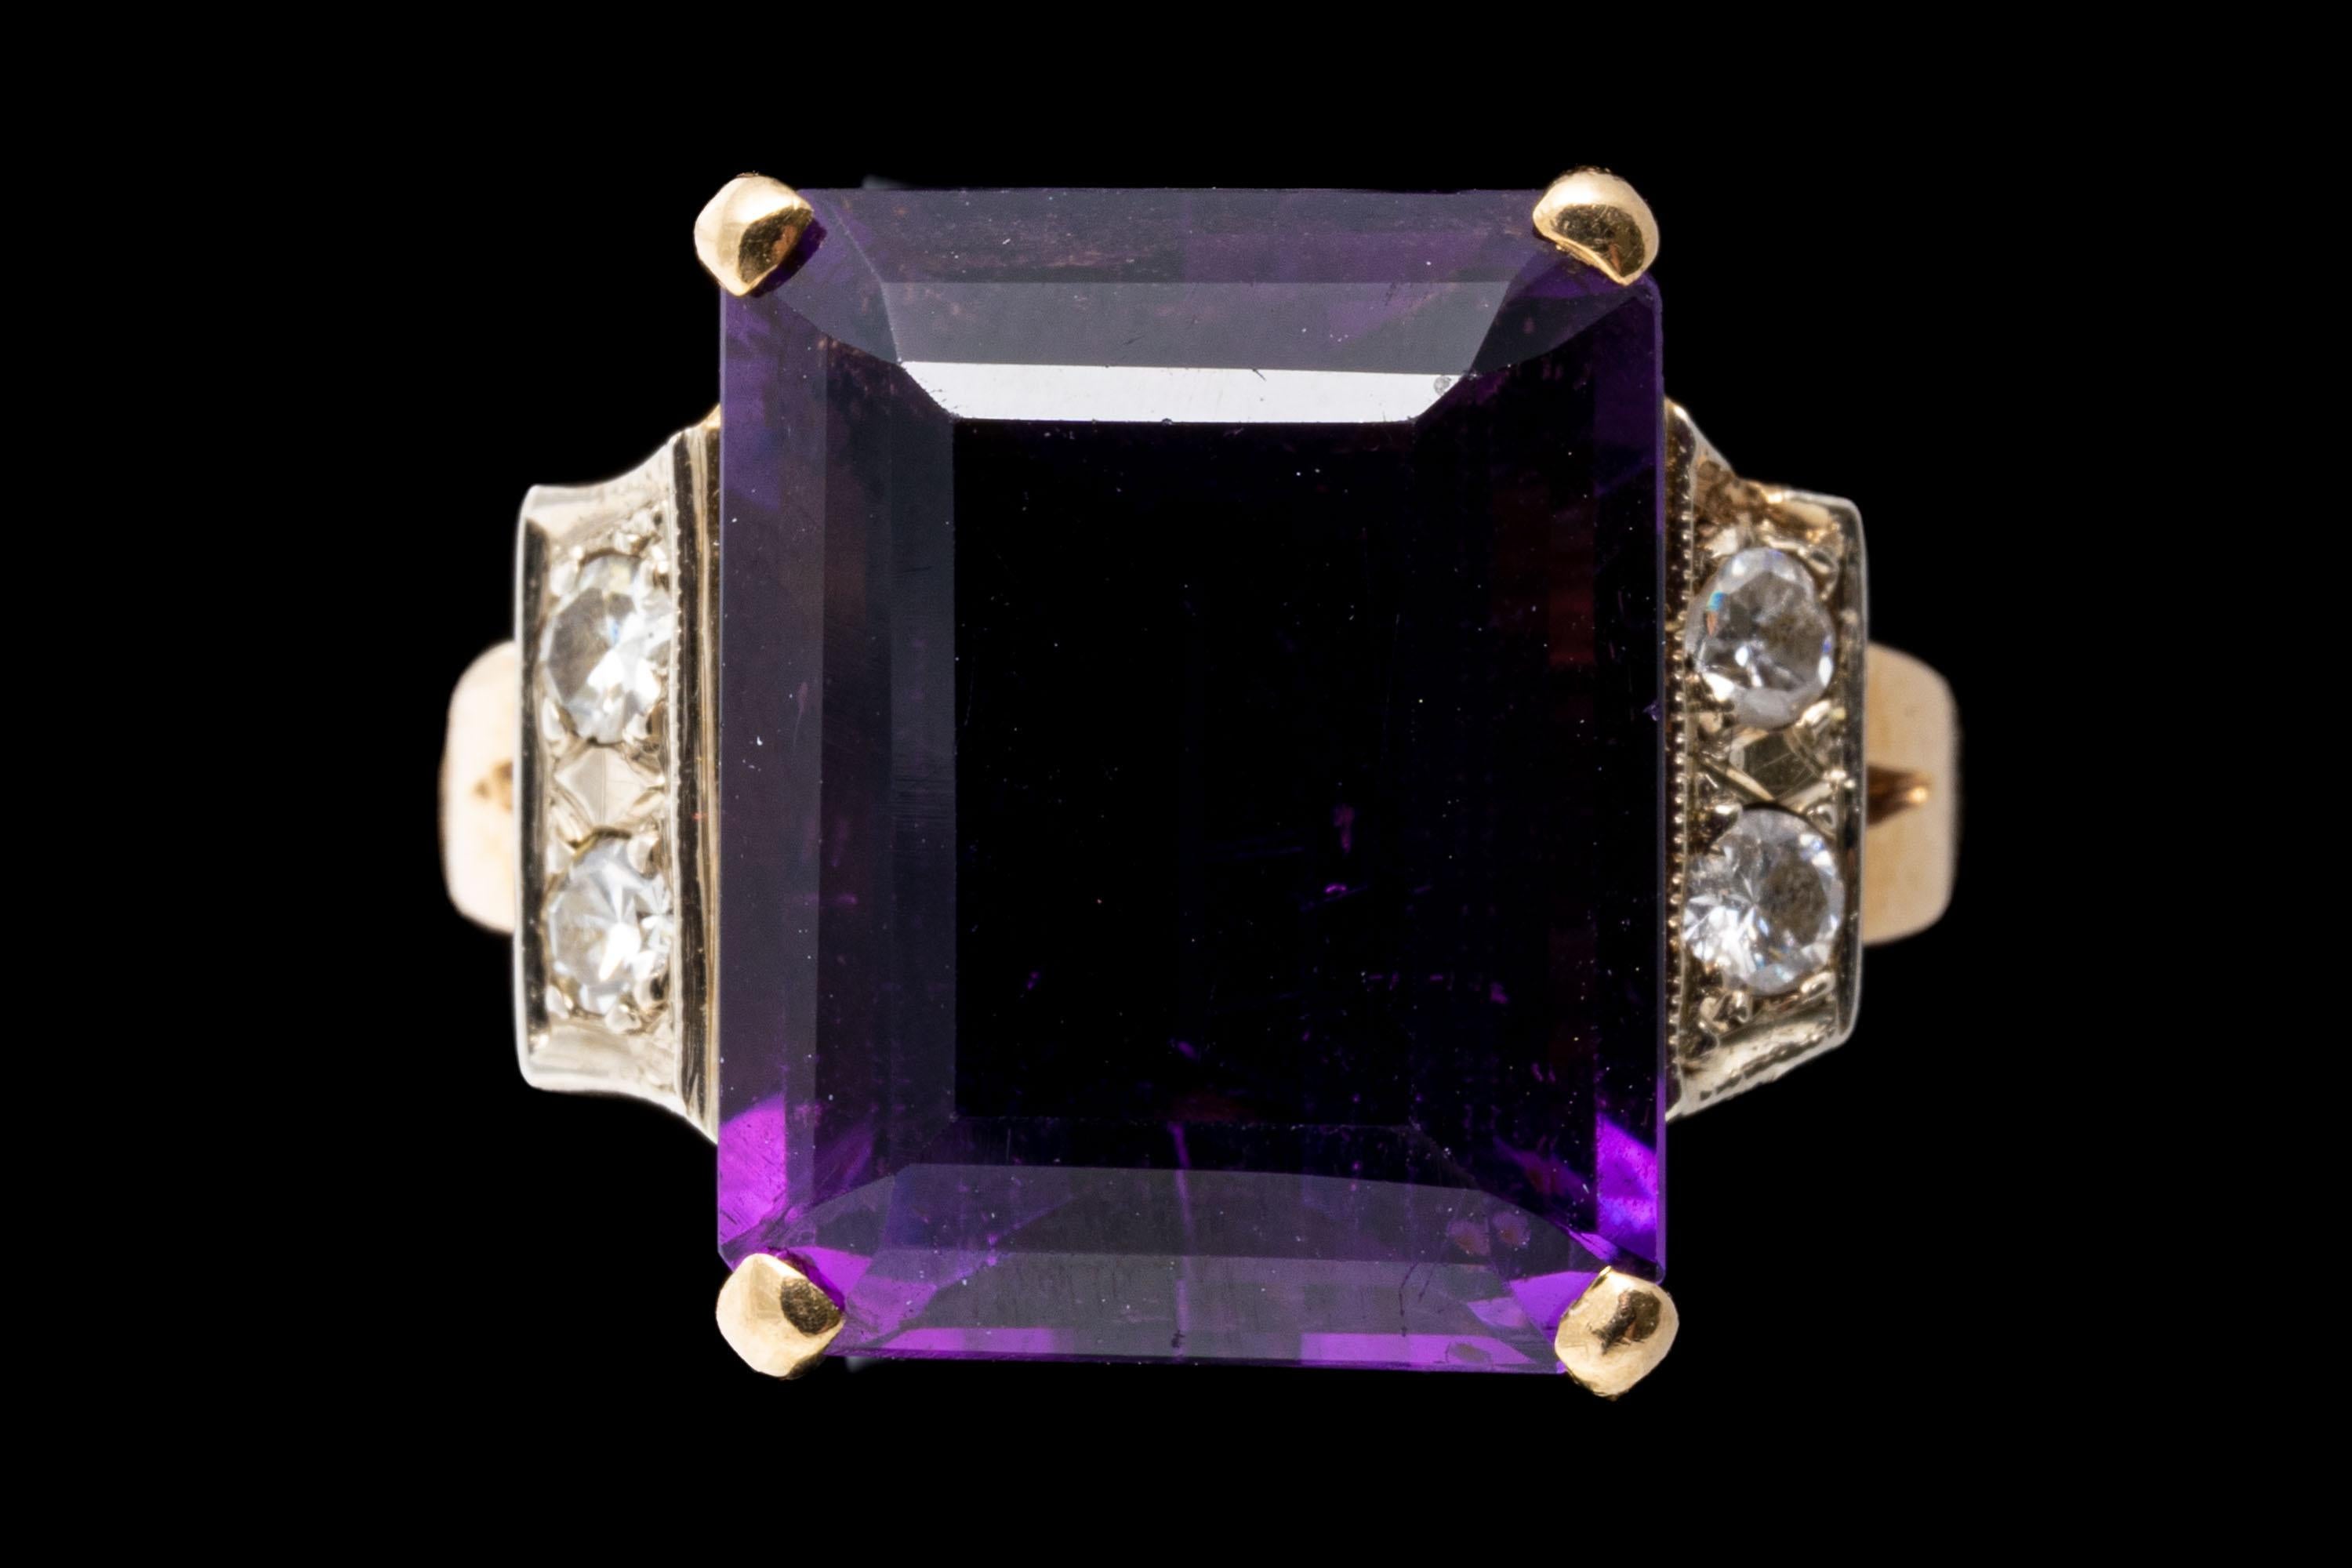 14k yellow gold ring. This gorgeous ring has a large emerald cut faceted, dark purple color amethyst center, approximately 9.25 CTS, prong set and flanked by two large single cut diamonds, approximately 0.12 TCW, and finished by split style